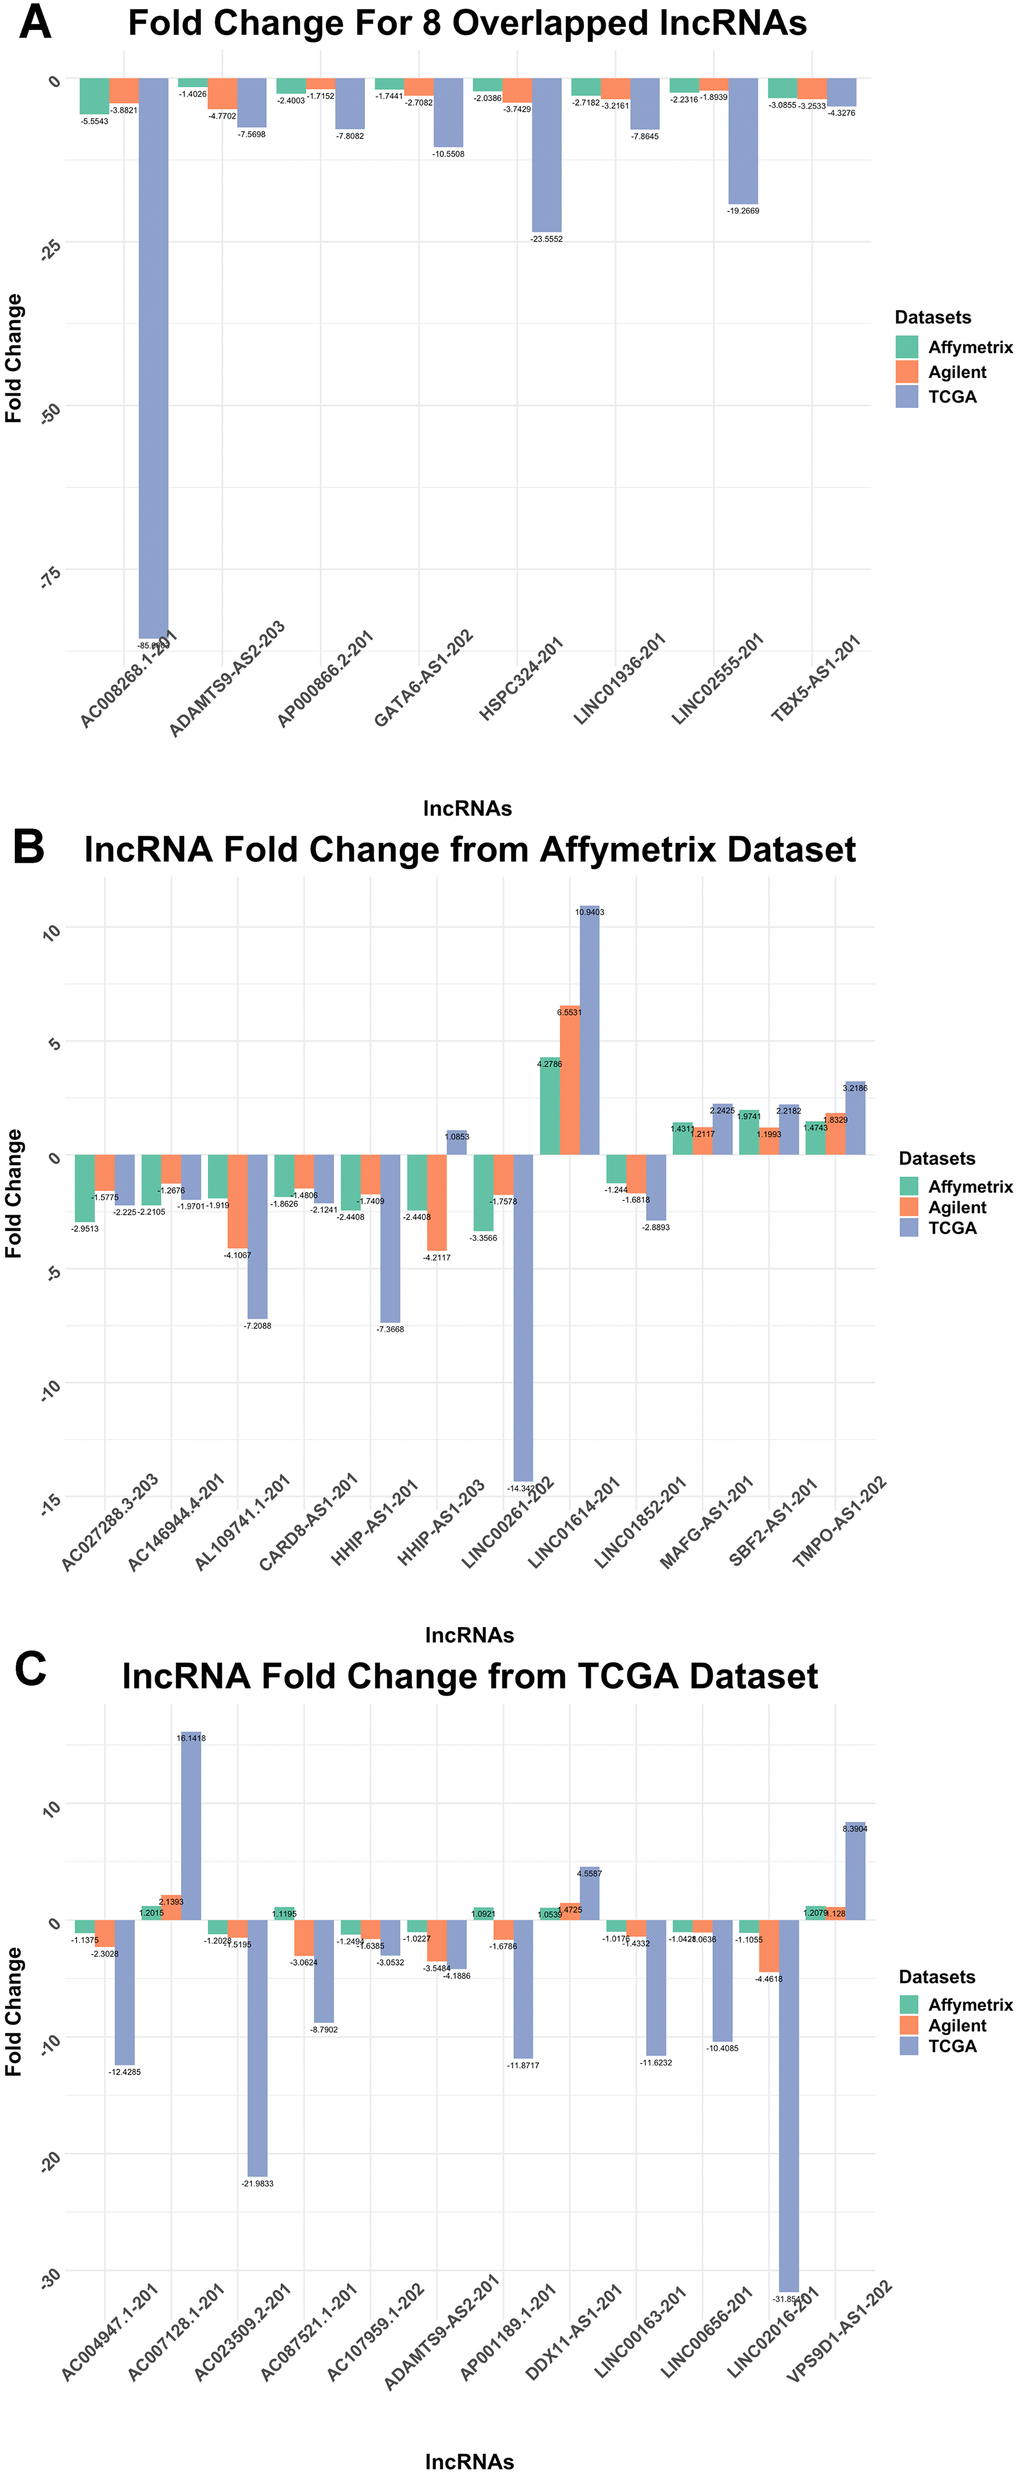 Fold Change column bar graph. (A) Fold Change for 8 Overlapped lncRNAs T-test result for overlapped 8 lncRNAs. All of them were downregulated. (B) lncRNA Fold Change from Affymetrix Dataset T-test result for lncRNAs selected from Affymetrix dataset when it was used as the training dataset. Most of the lncRNAs downregulate, only a few upregulate. (C) lncRNA Fold Change from TCGA Dataset T-test result for lncRNAs selected from TCGA dataset as the training dataset. The majority of the lncRNAs downregulate.